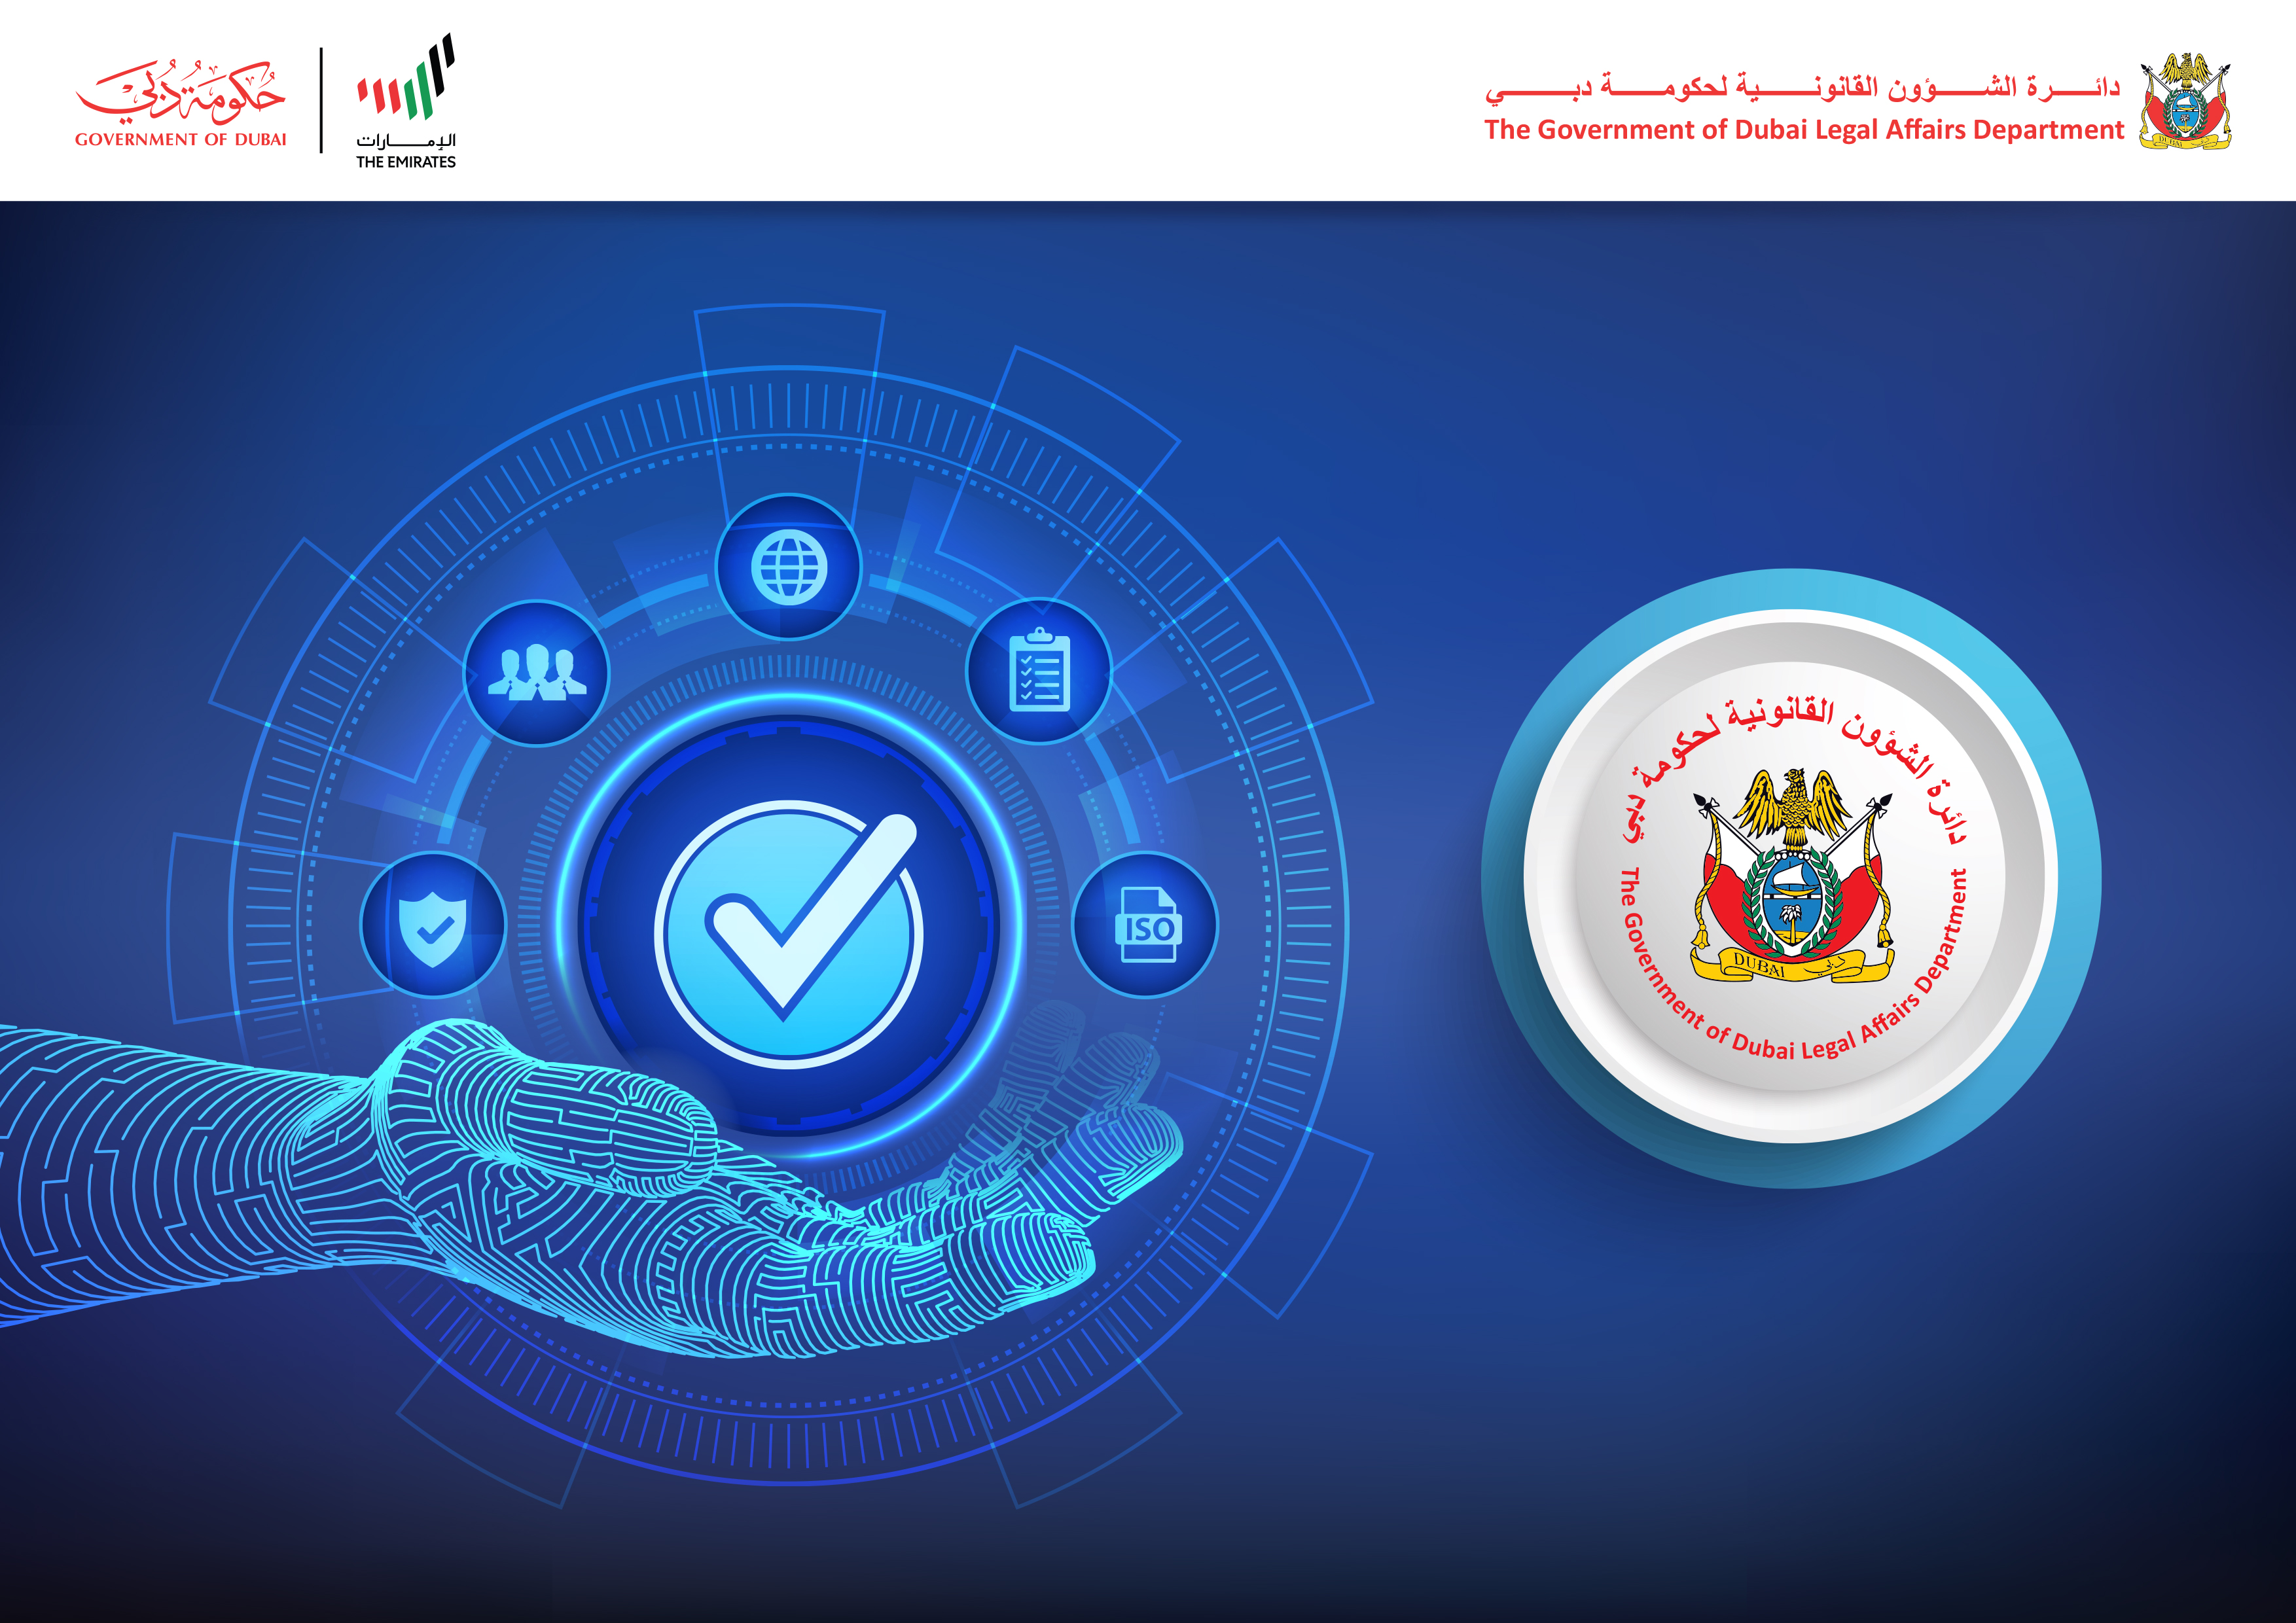   The Government of Dubai Legal Affairs Department maintains standards and requirements for the renewal of three ISO certificates